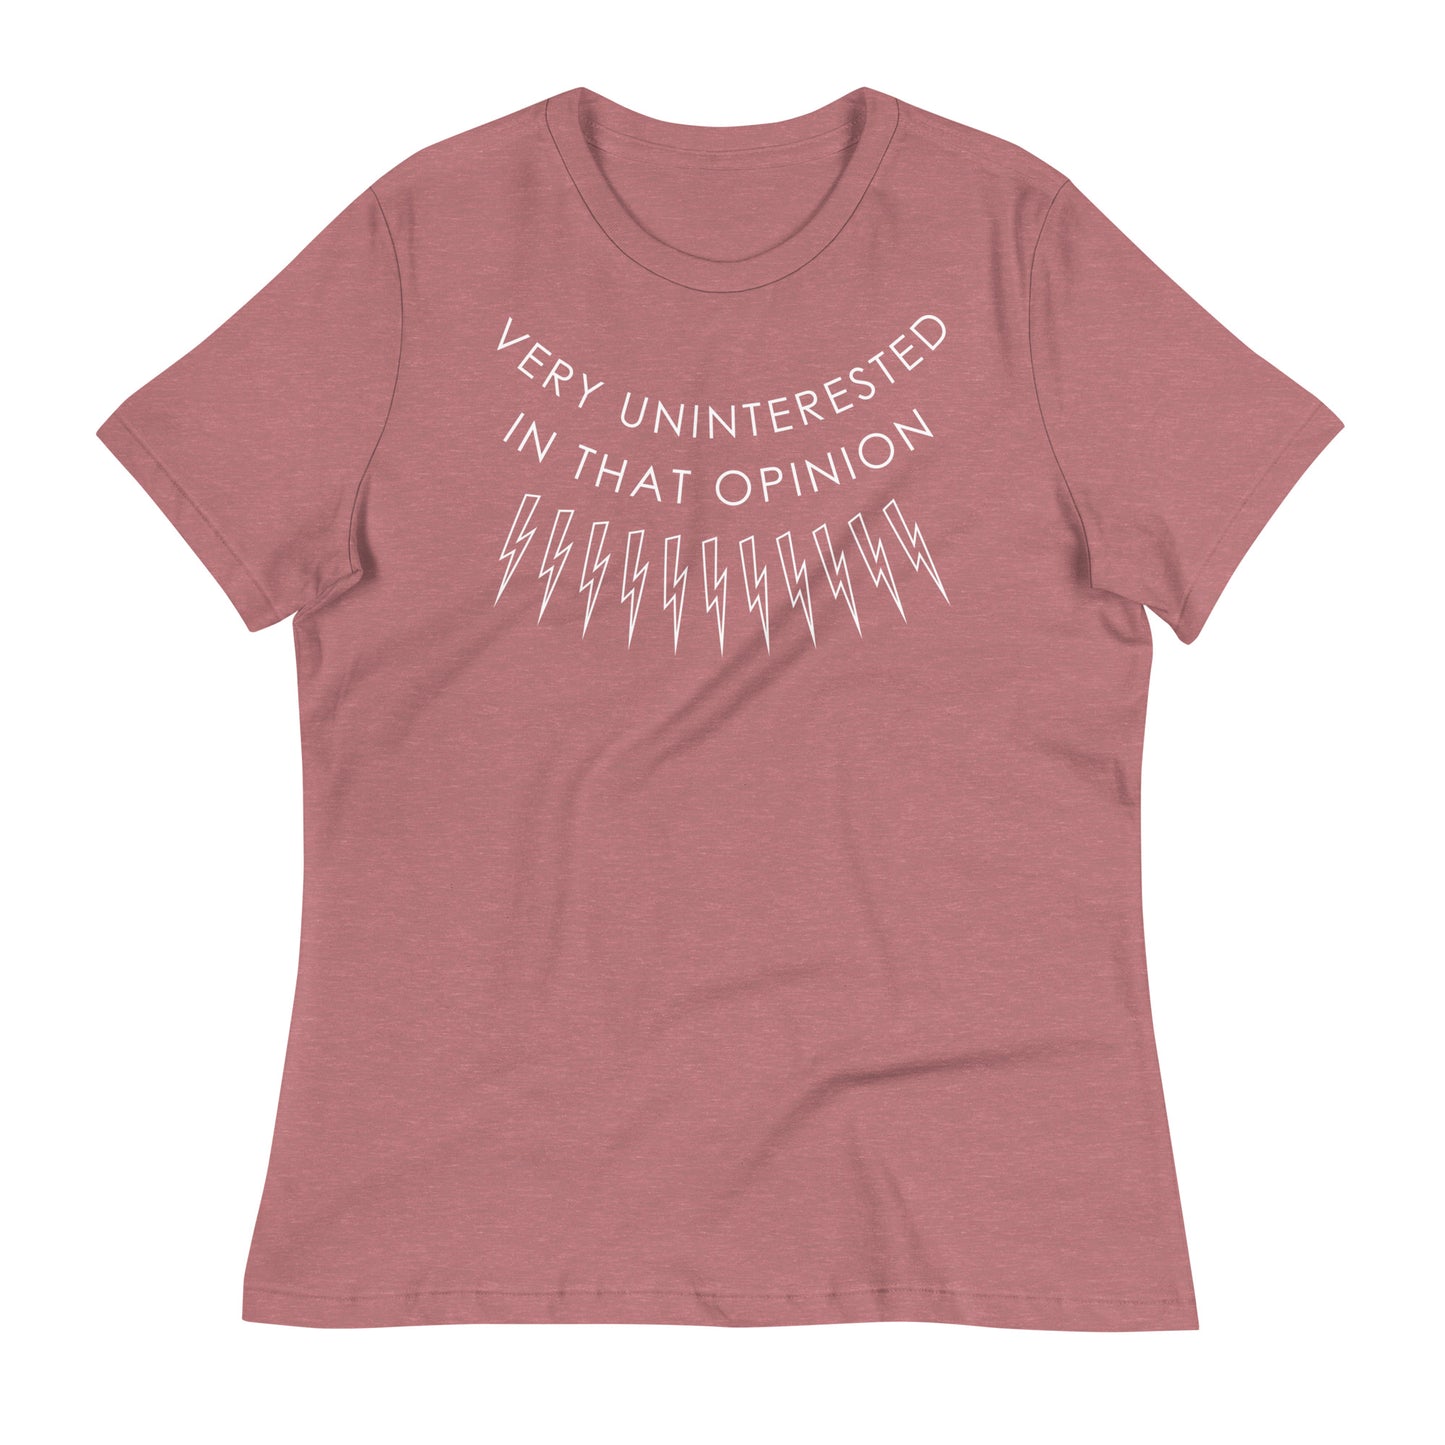 Very Uninterested In That Opinion Women's Signature Tee